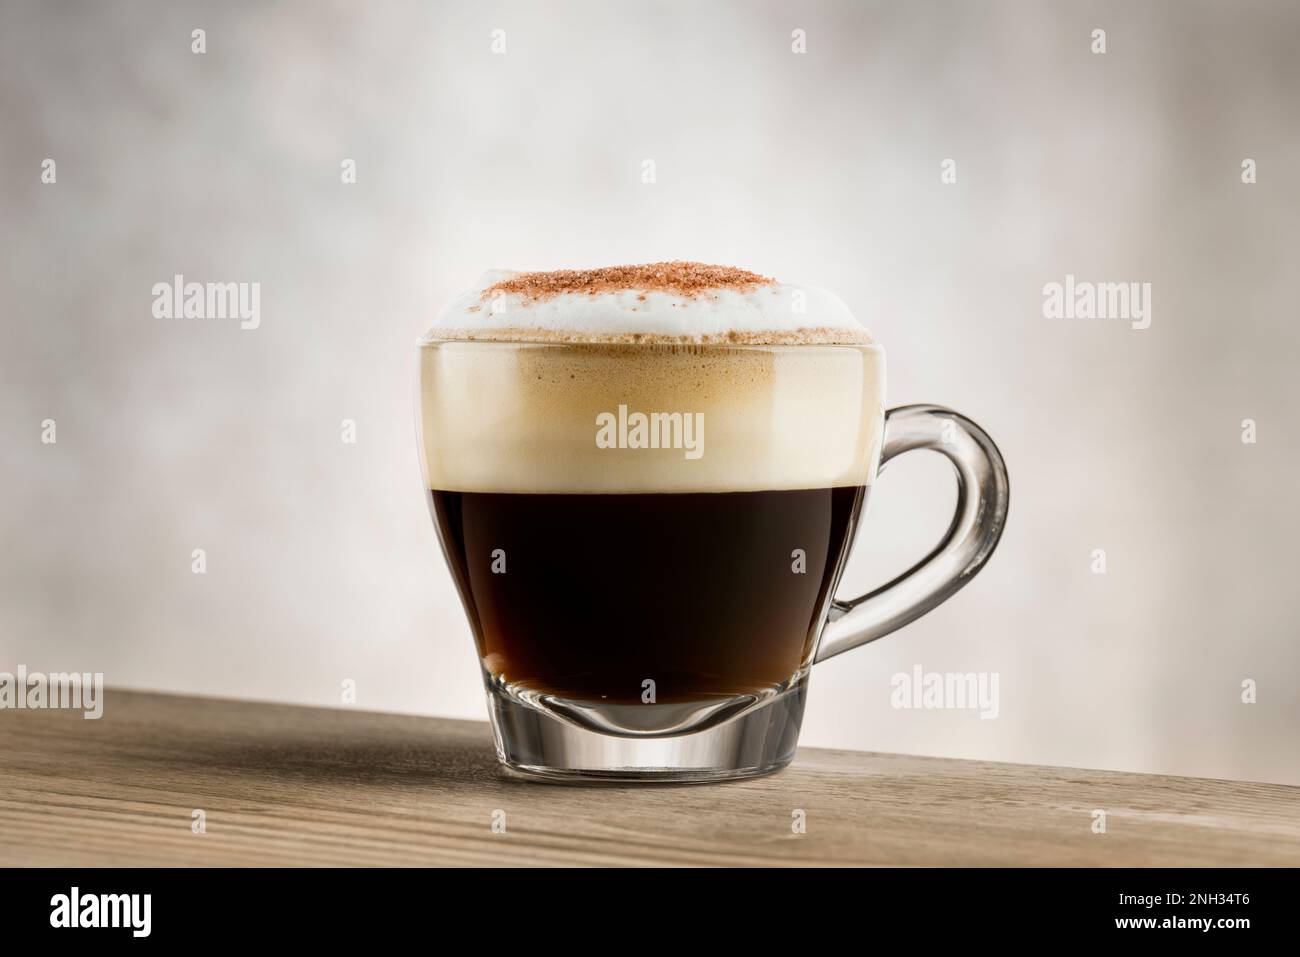 Cappuccino in glass cup on wooden table Stock Photo